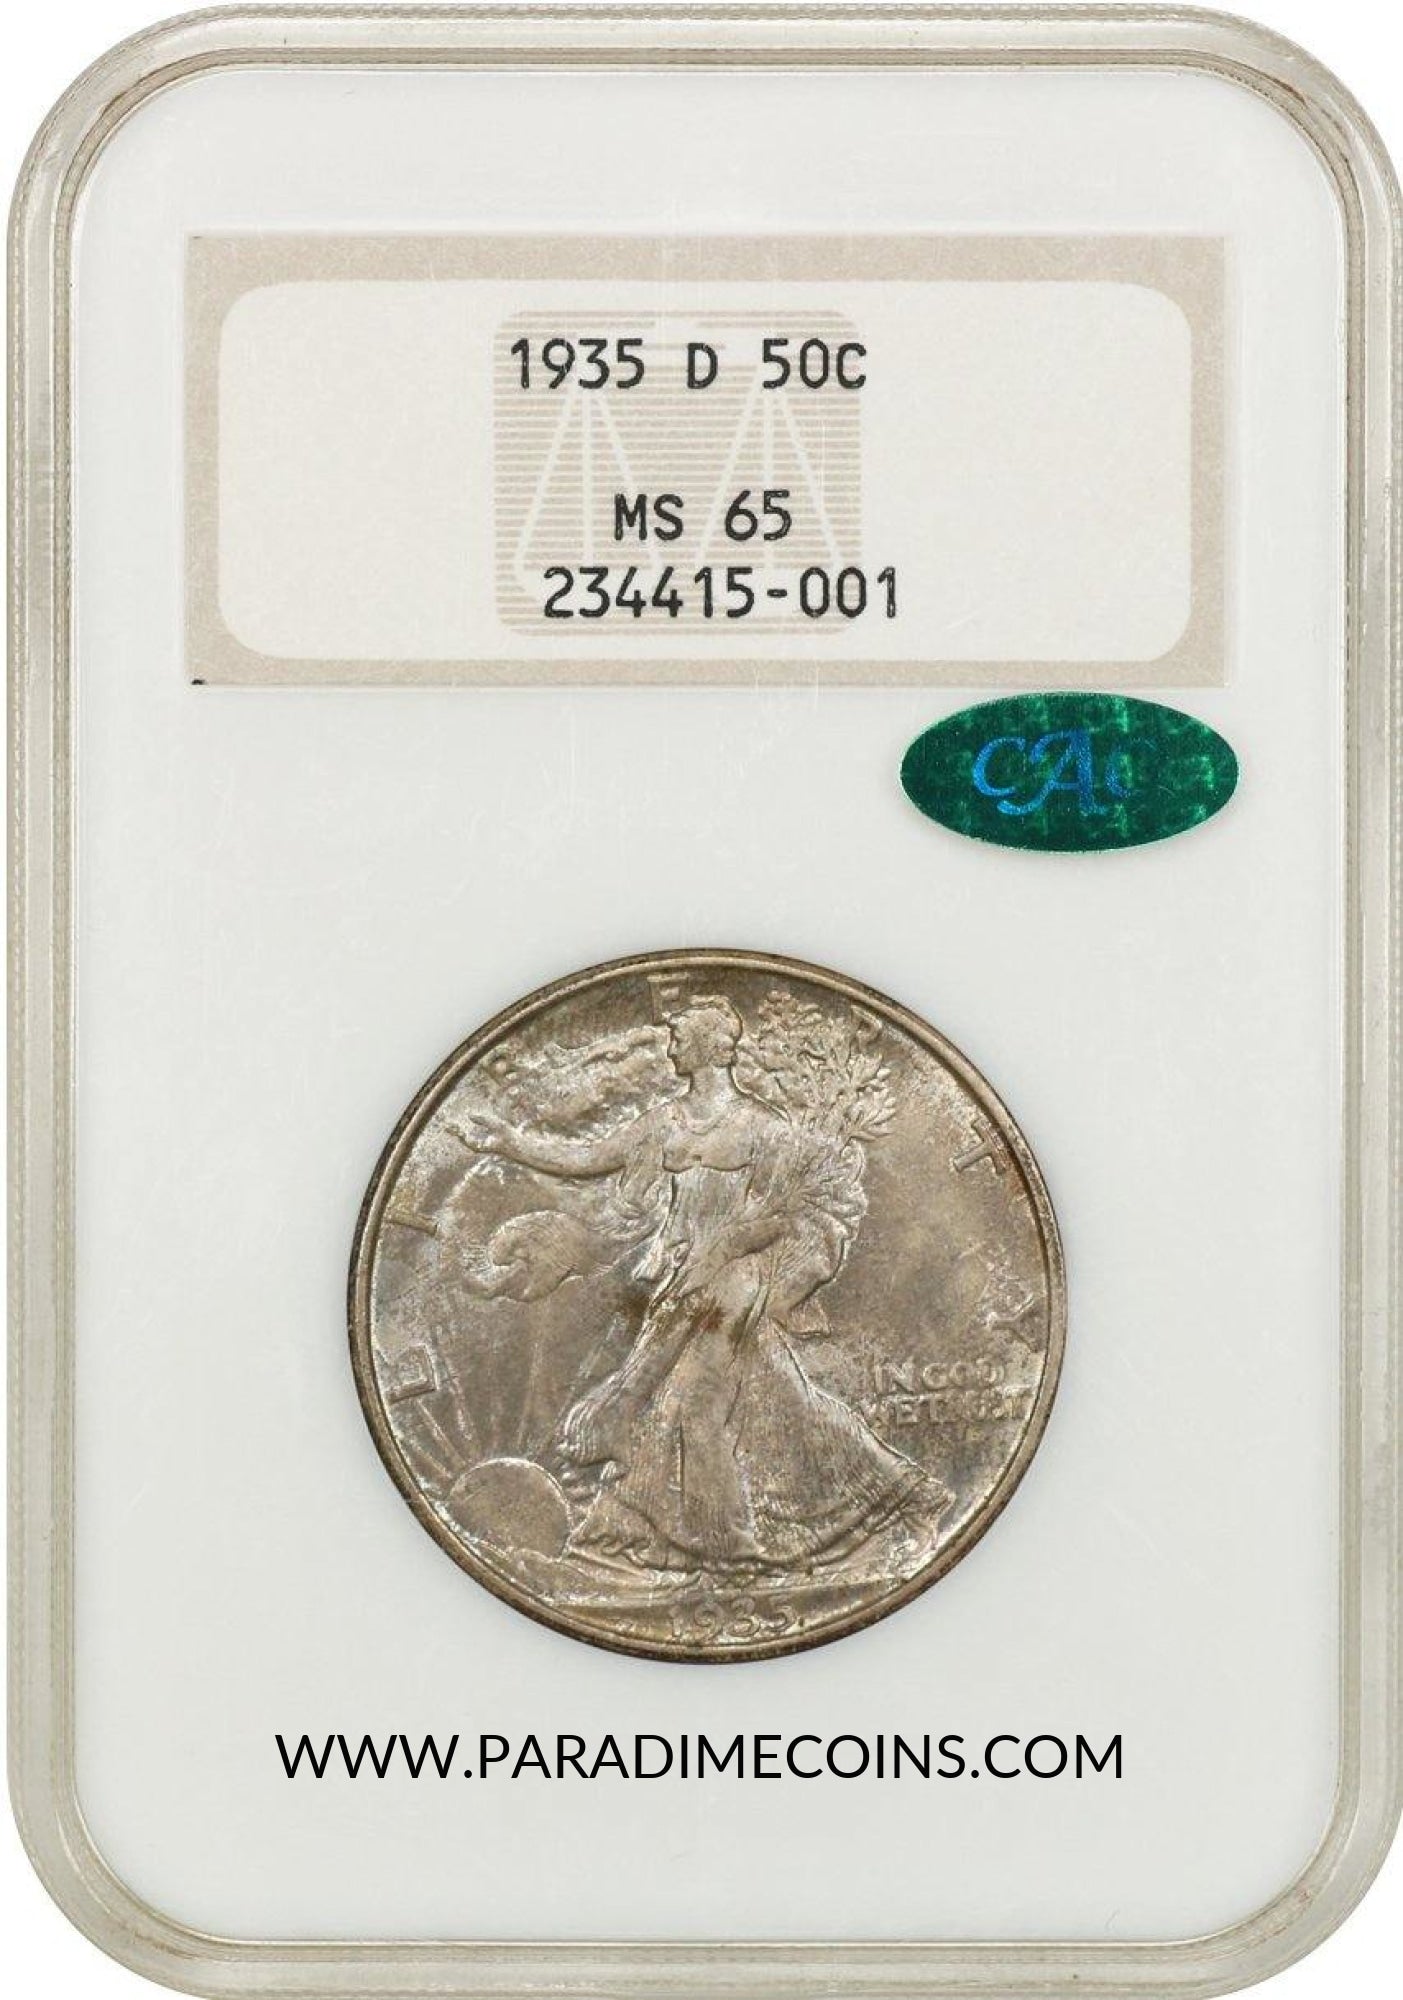 1935-D 50C MS65 OH NGC CAC - Paradime Coins US Coins For Sale